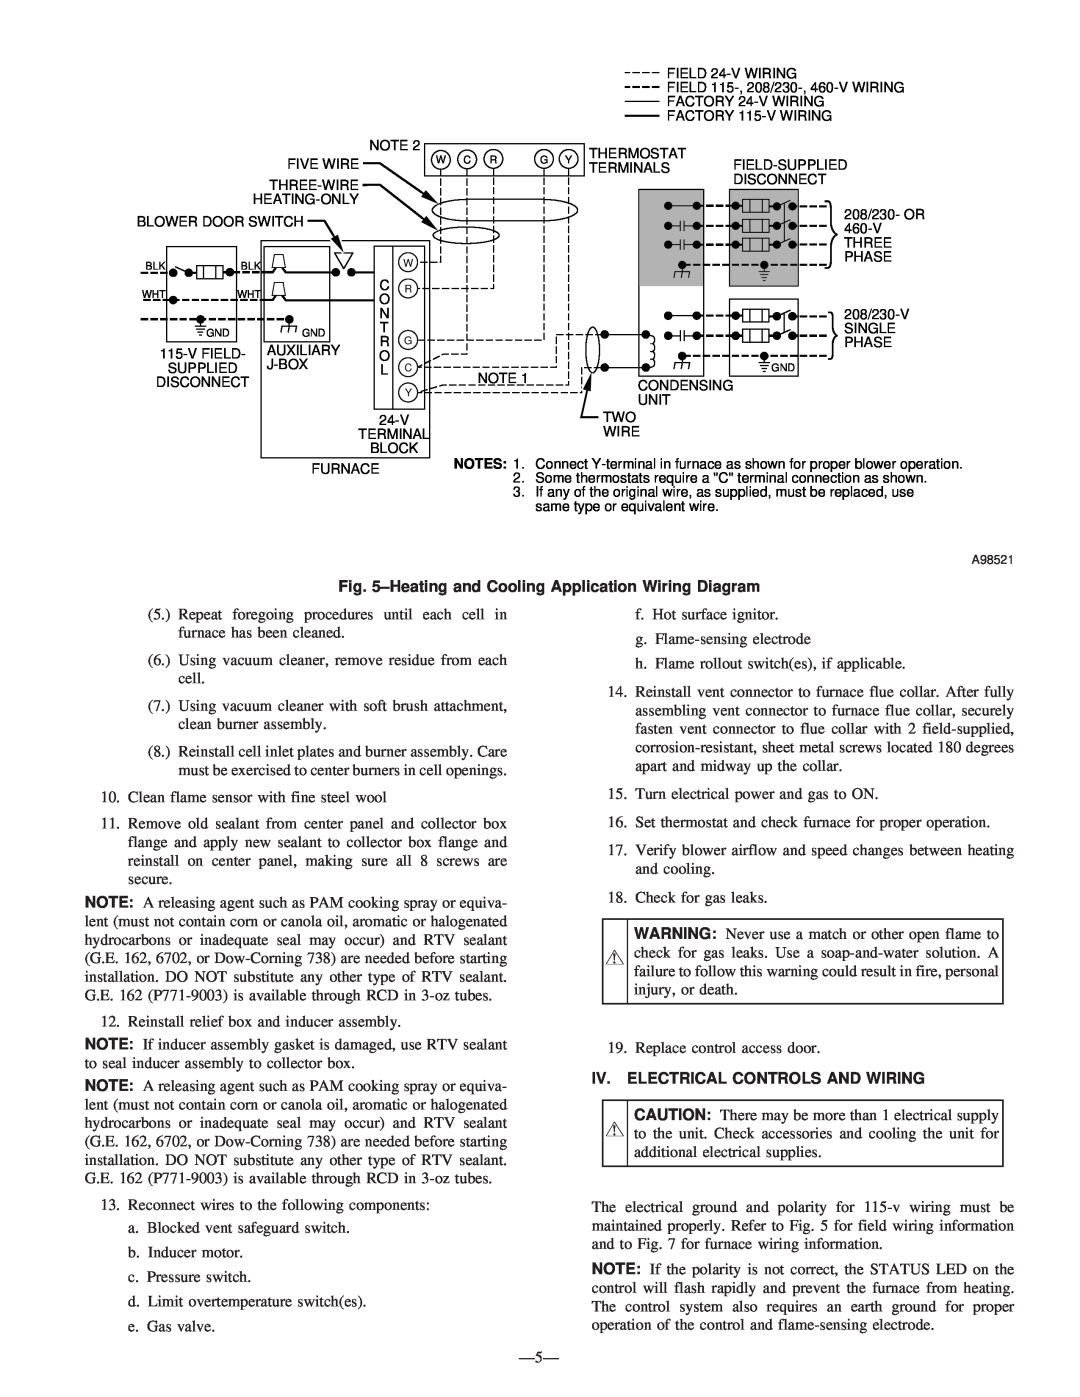 Bryant 393AAV instruction manual Iv. Electrical Controls And Wiring 